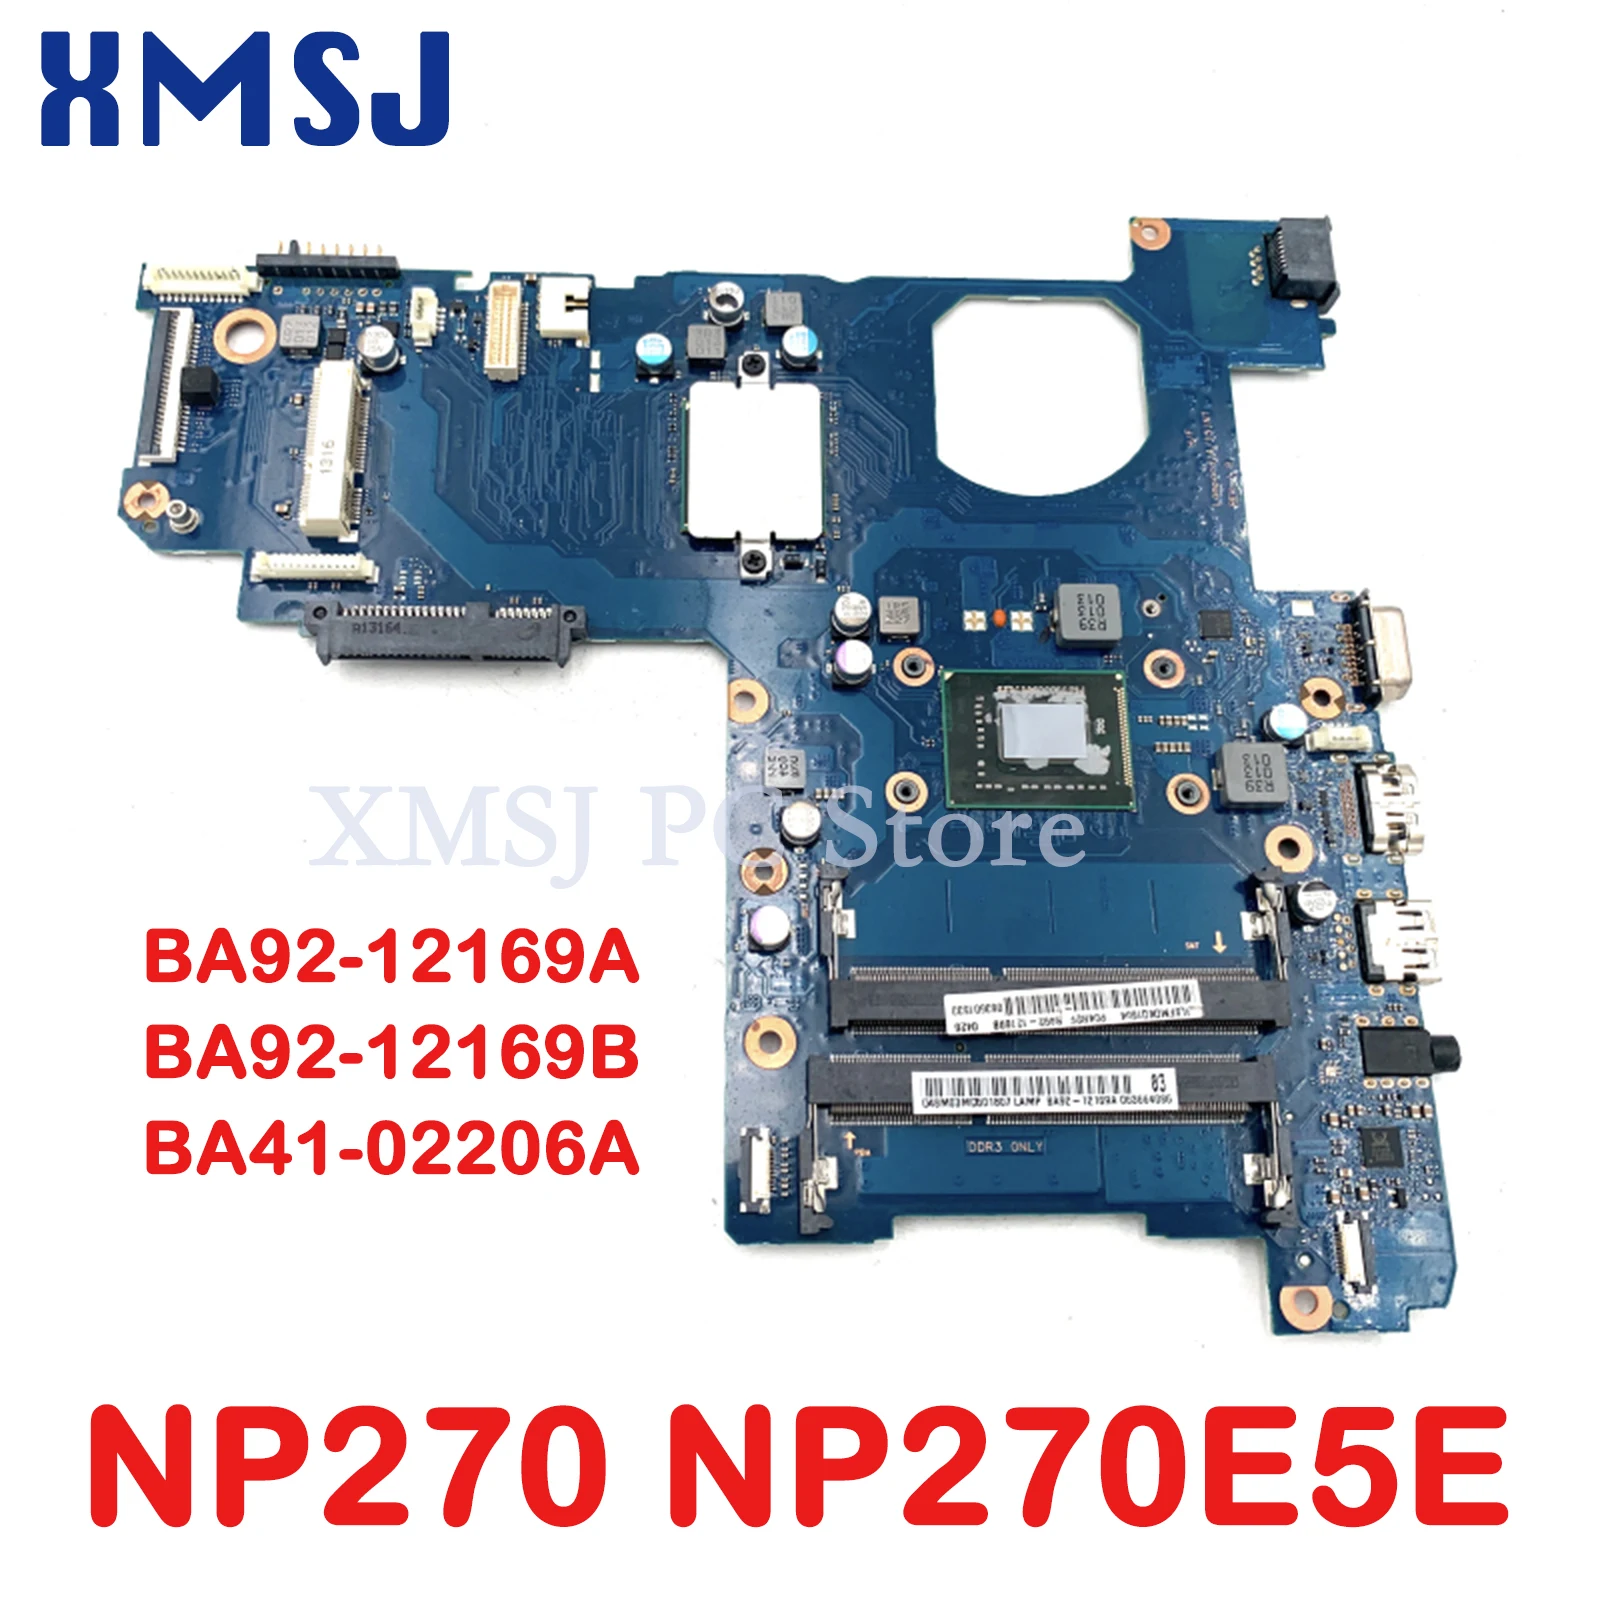 XMSJ For Samsung NP270 NP270E5E BA92-12169A BA92-12169B BA41-02206A Laptop Motherboard DDR3 With CPU Onboard Main Board